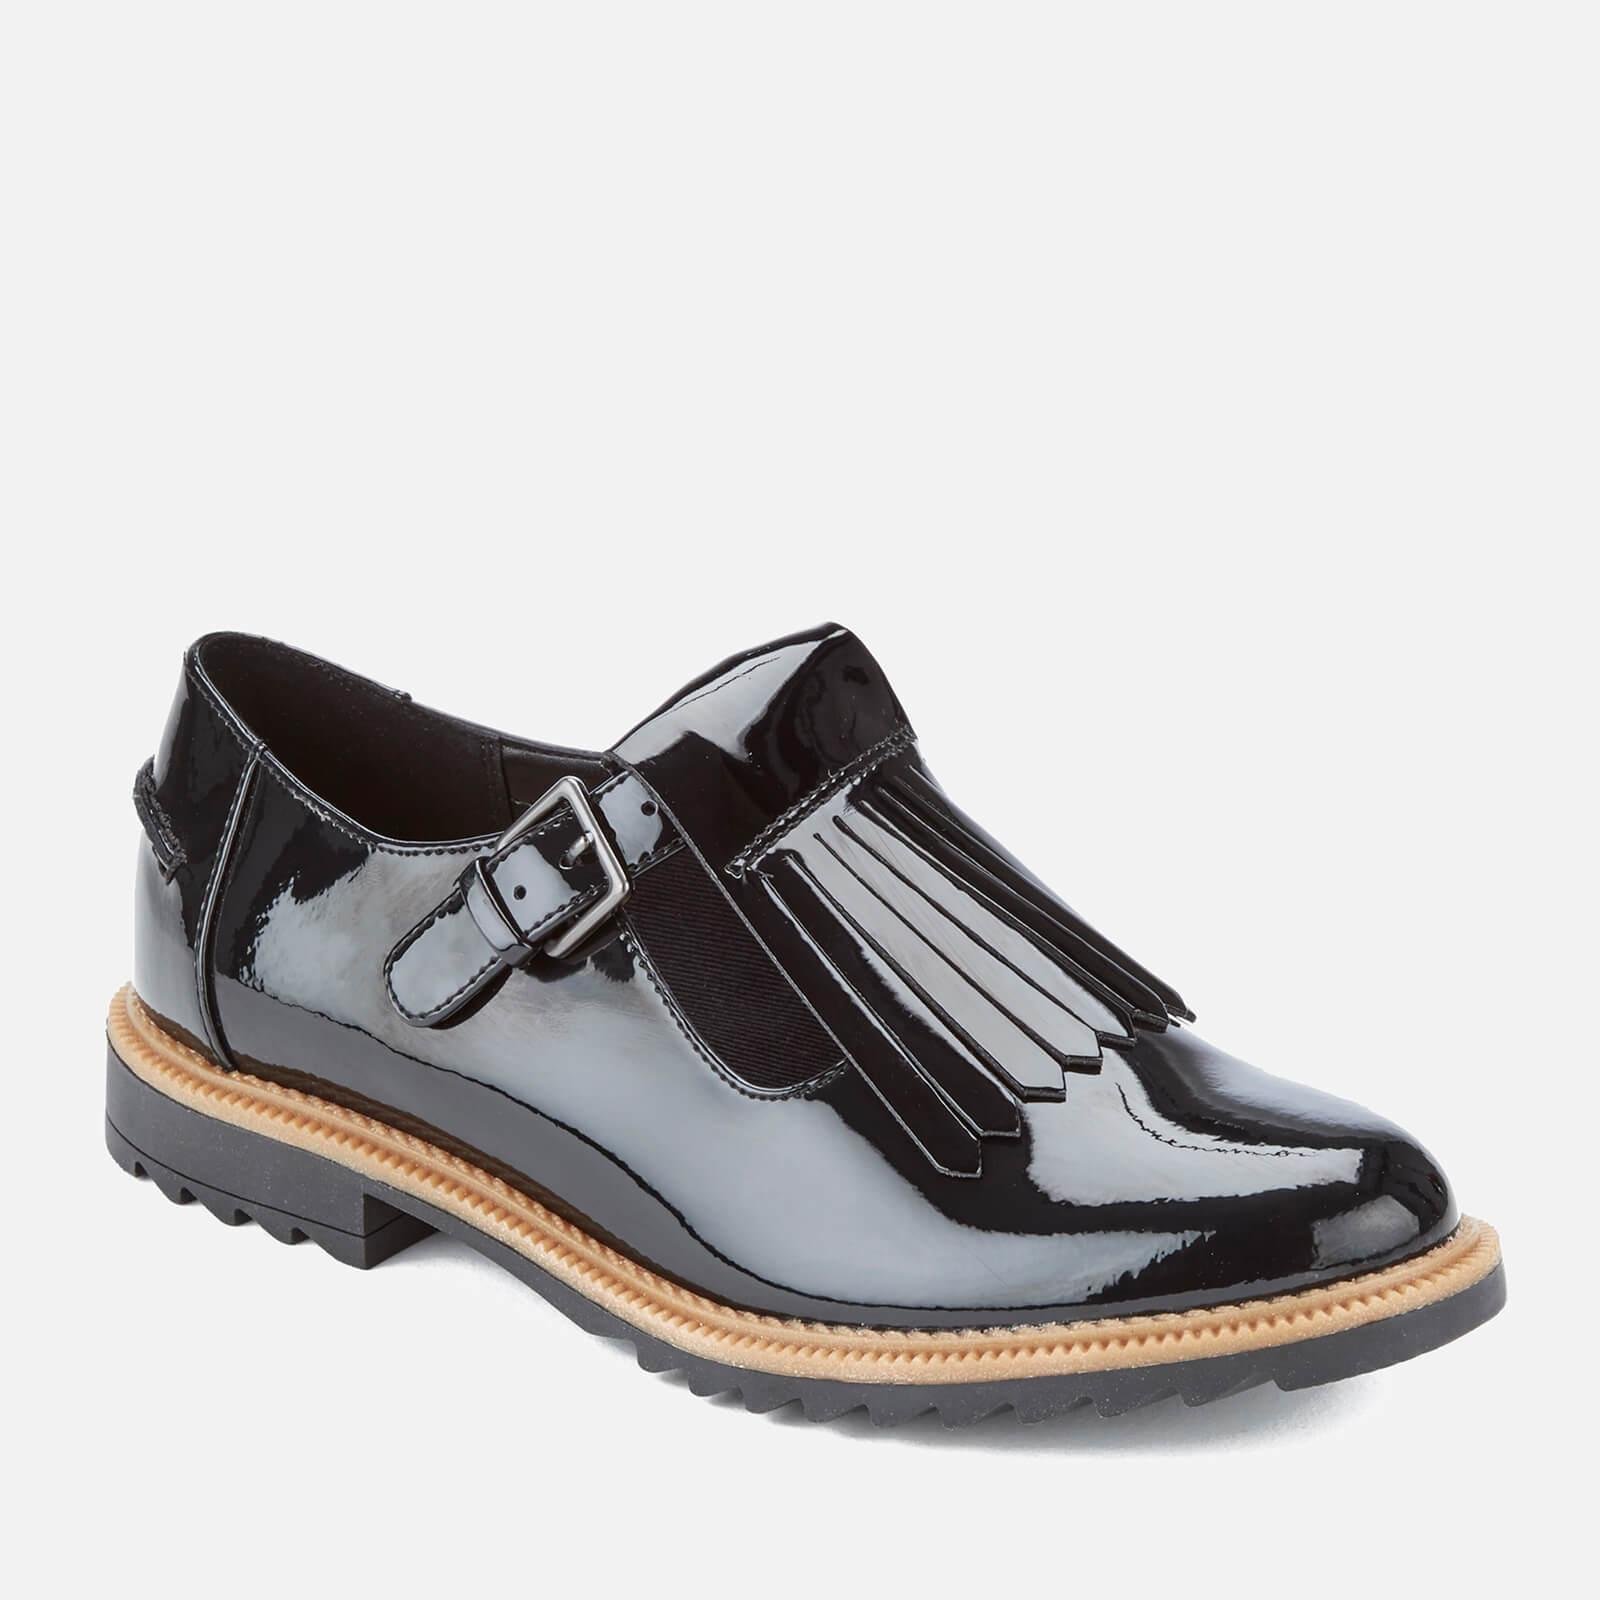 clarks shoes patent leather